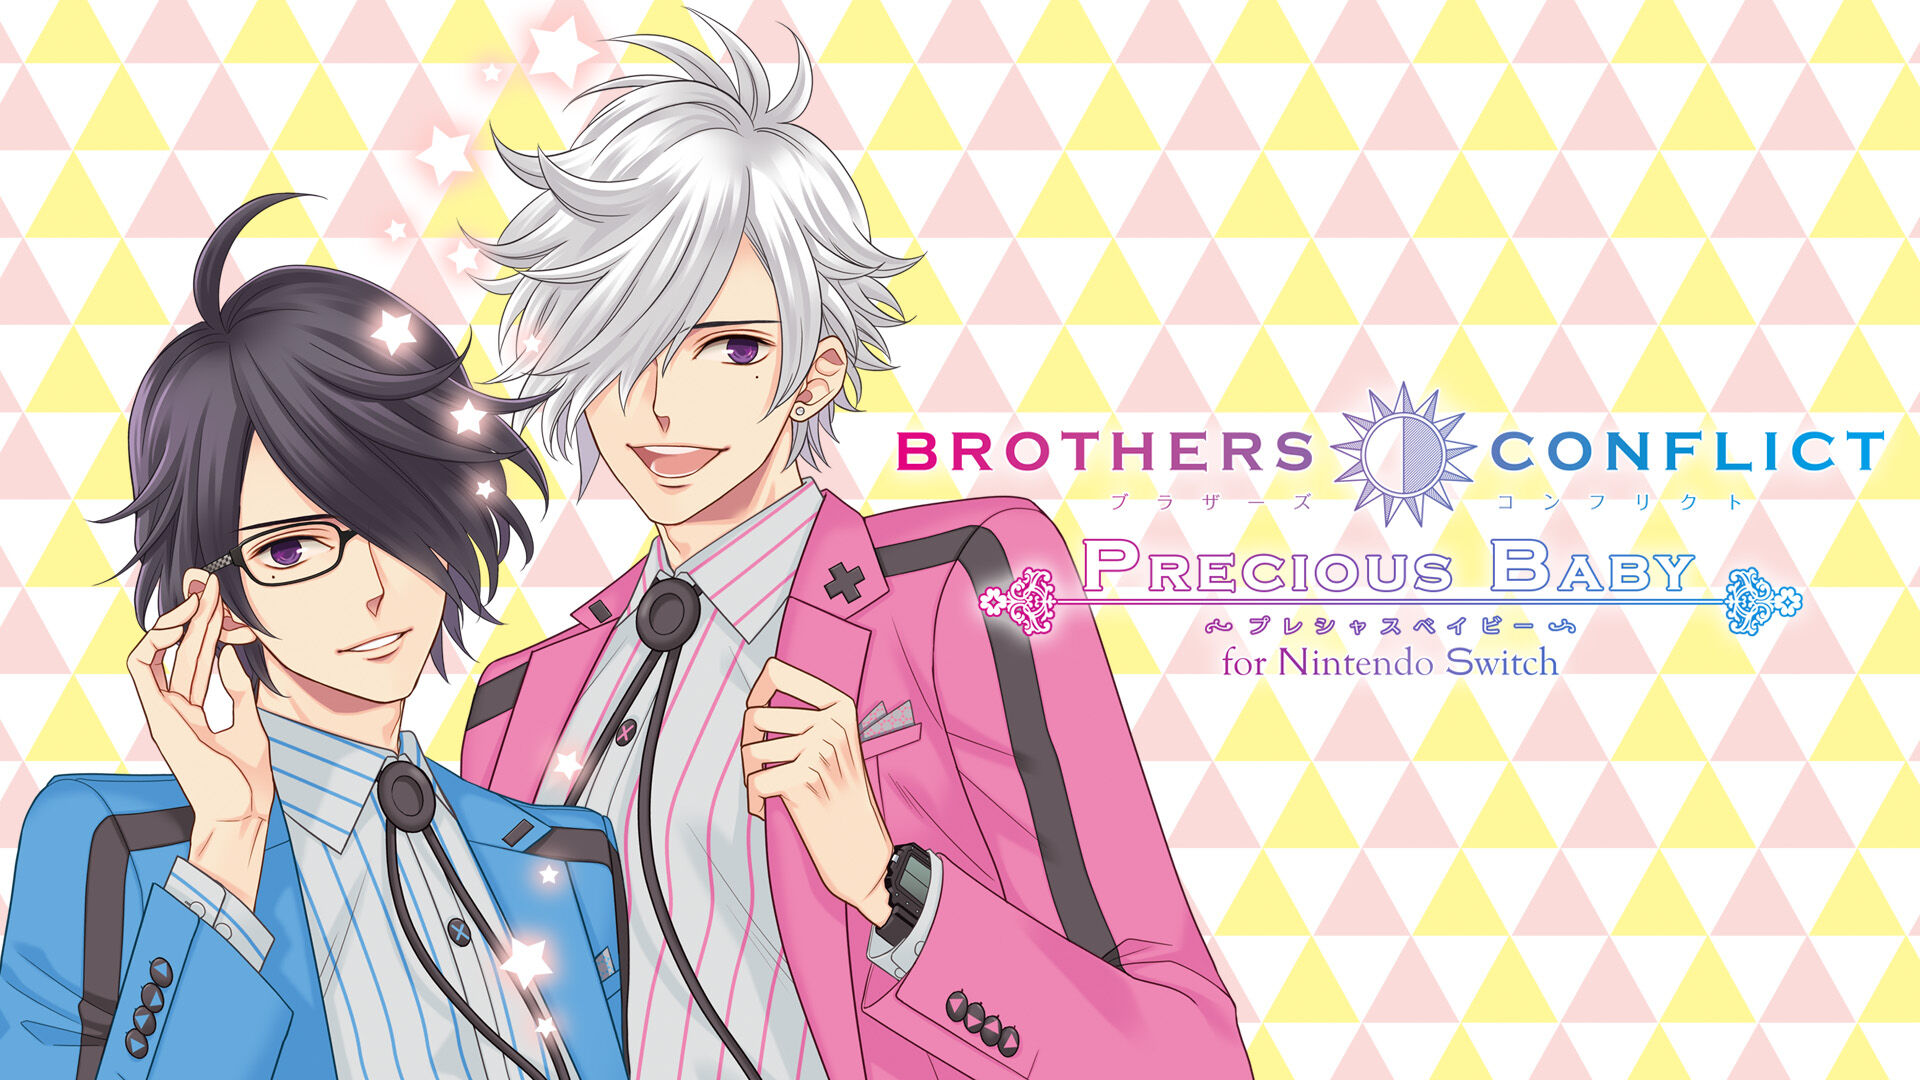 BROTHERS CONFLICT Precious Baby for Nintendo Switch ダウンロード版